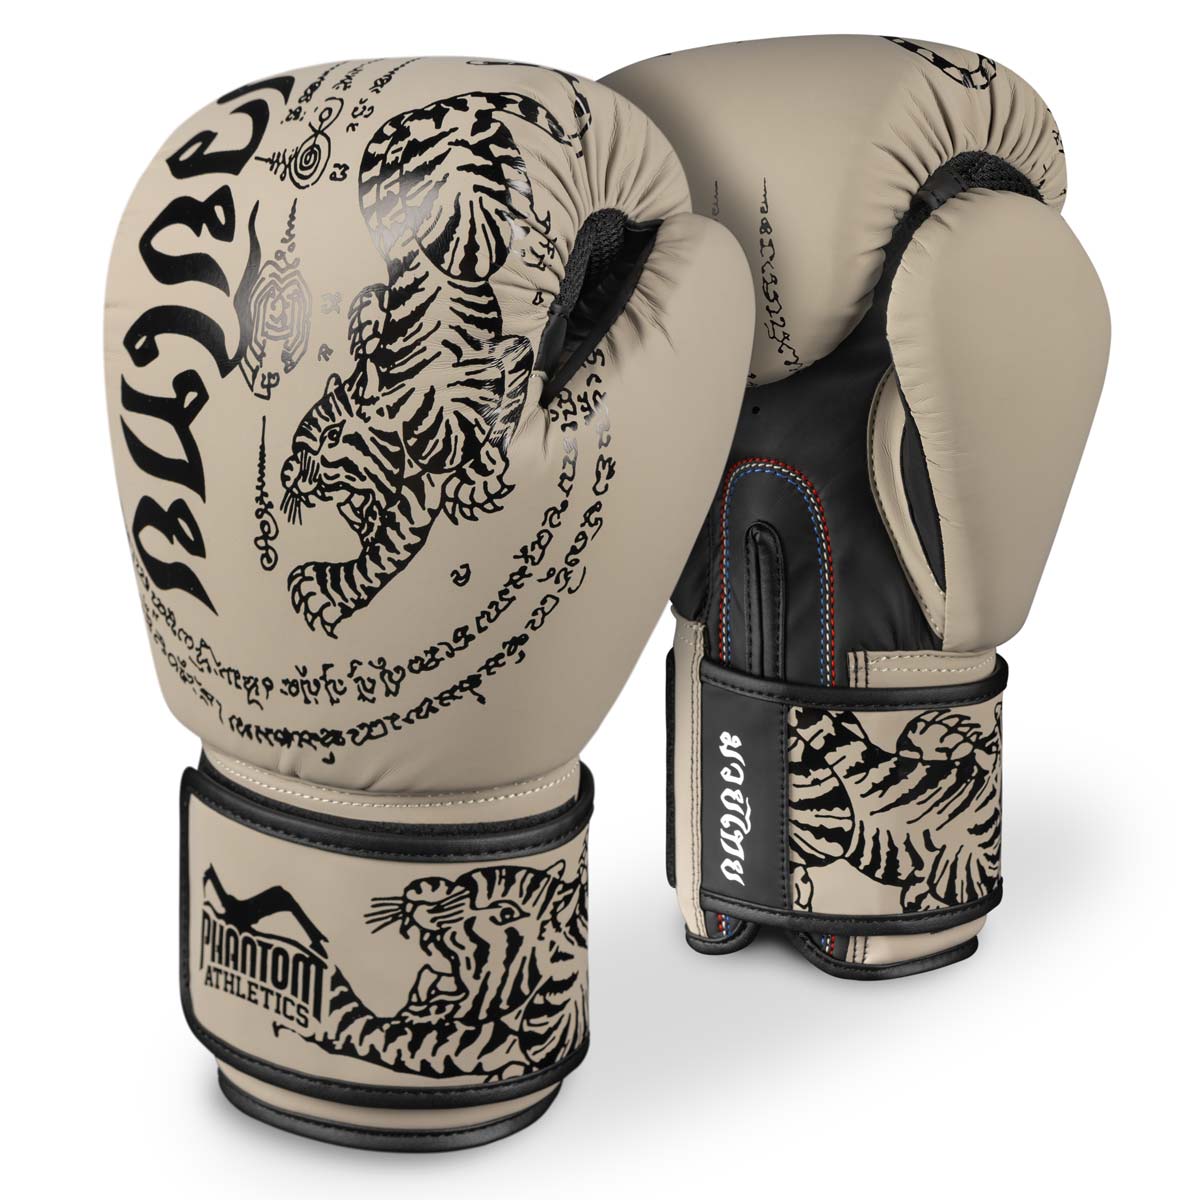 Phantom Muay Thai boxing gloves with Thai print in the color sand. 